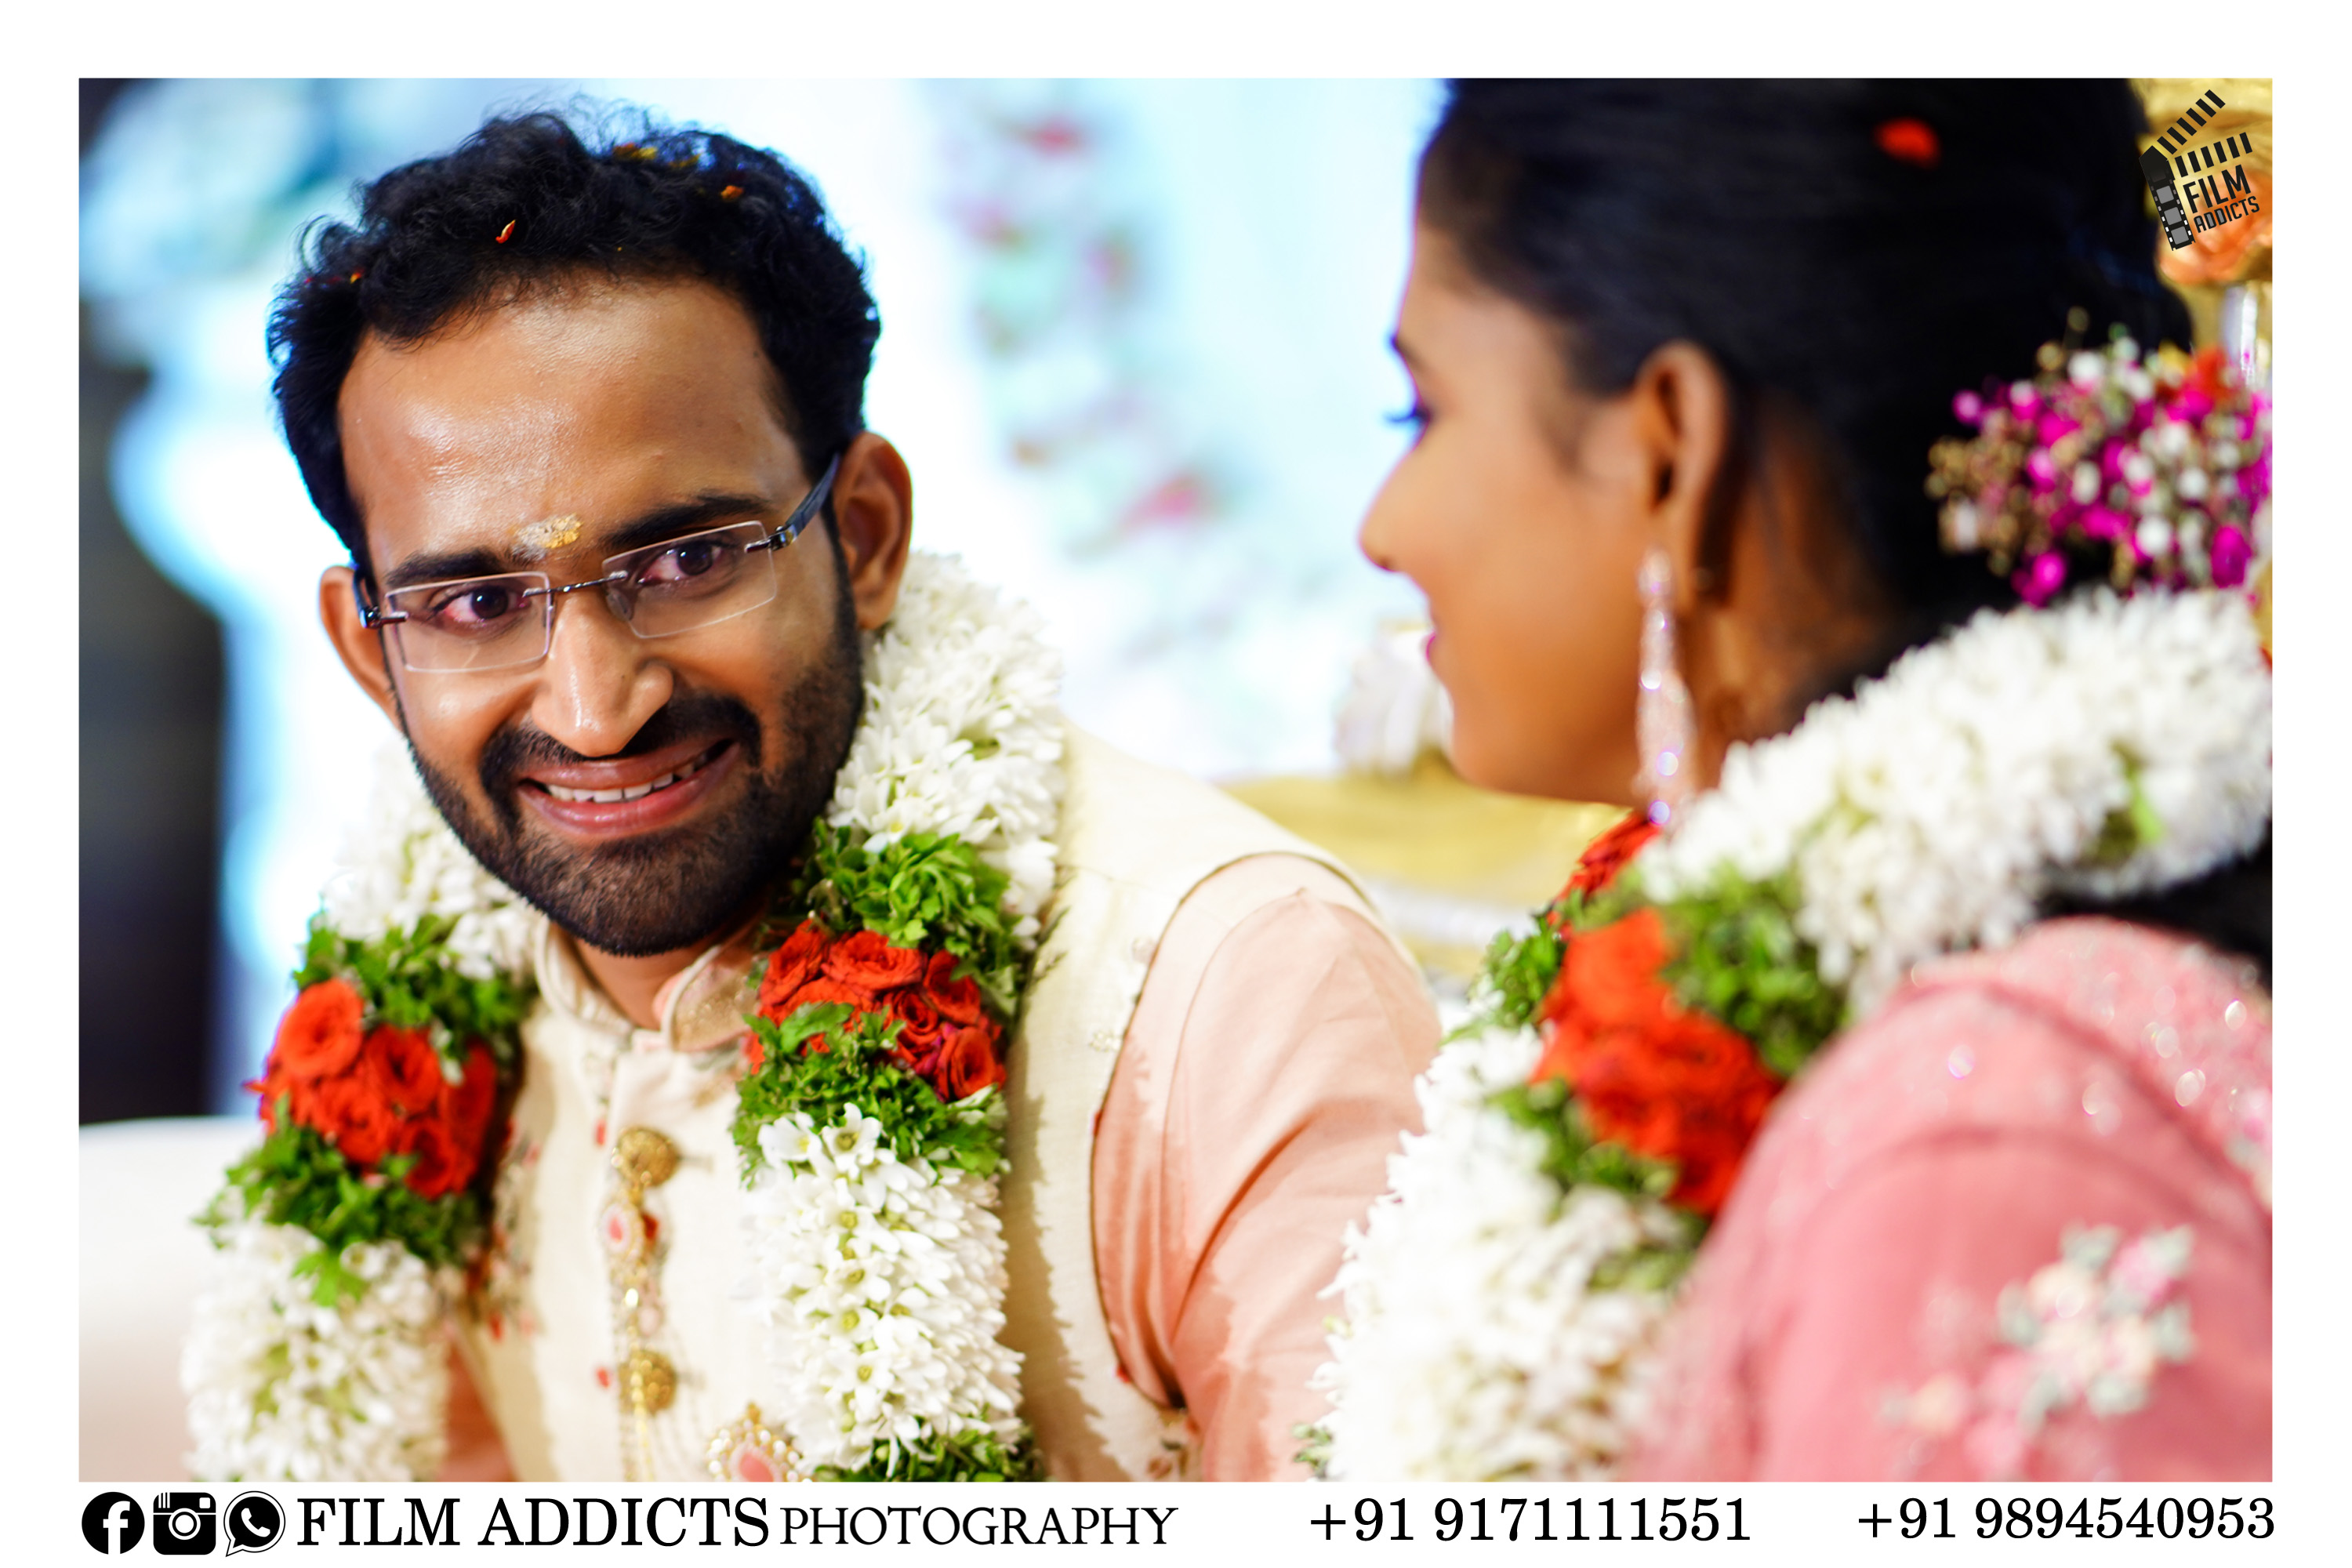 Best Candid Photographers in Thanjavur-FilmAddicts Photography,best Wedding photographers in Thanjavur,best candid photographers in Thanjavur,best Wedding photography in Thanjavur,best candid photography in Thanjavur, Best Wedding candid Photographers in Thanjavur, best marriage photographers in Thanjavur,best marriage photography in Thanjavur,best photographers in Thanjavur,best photography in Thanjavur,best Wedding candid photography in Thanjavur,best Wedding video in Thanjavur,best Wedding videographers in Thanjavur,best Wedding videography in Thanjavur,best candid videographers in Thanjavur,best candid videography in Thanjavur,best marriage videographers in Thanjavur,best marriage videography in Thanjavur,best videographers in Thanjavur,best videography in Thanjavur,best Wedding candid videography in Thanjavur,best Wedding candid videographers in Thanjavur,best helicam operators in Thanjavur,best drone operators in Thanjavur,best Wedding studio in Thanjavur,best professional photographers in Thanjavur,best professional photography in Thanjavur,No.1 Wedding photographers in Thanjavur,No.1 Wedding photography in Thanjavur,Thanjavur Wedding photographers,Thanjavur Wedding photography,Thanjavur Wedding videos,best candid videos in Thanjavur,best candid photos in Thanjavur,best helicam operators photography in Thanjavur,best helicam operator photographers in Thanjavur,best Wedding videography in Thanjavur.